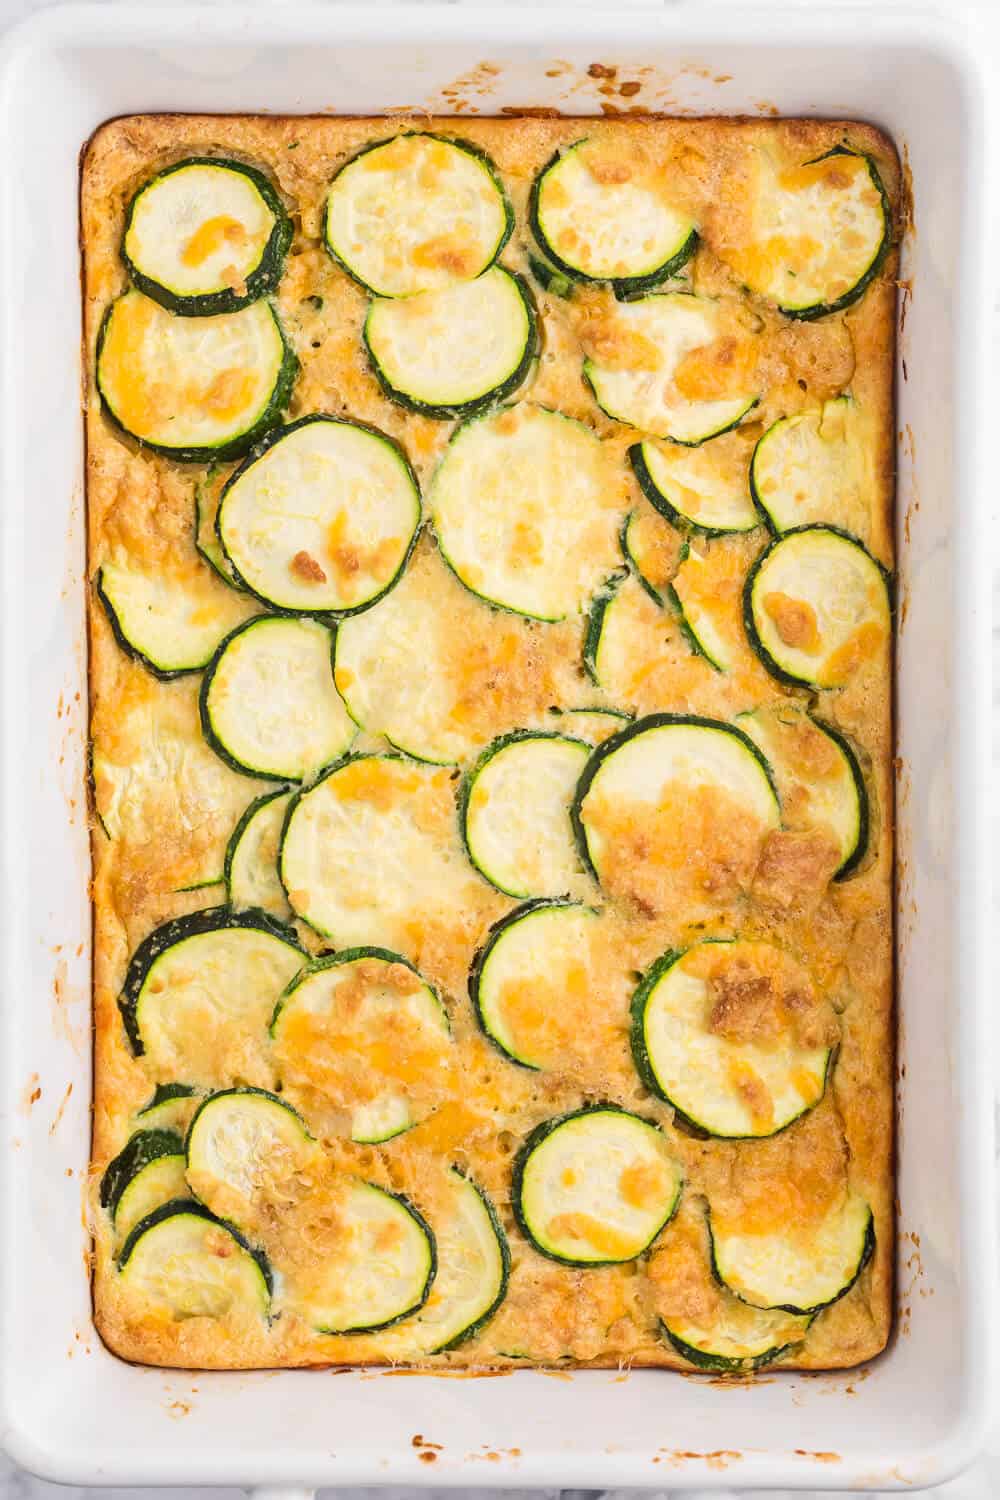 Baked Zucchini - An egg-based casserole with roasted zucchini slices and loads of cheese.